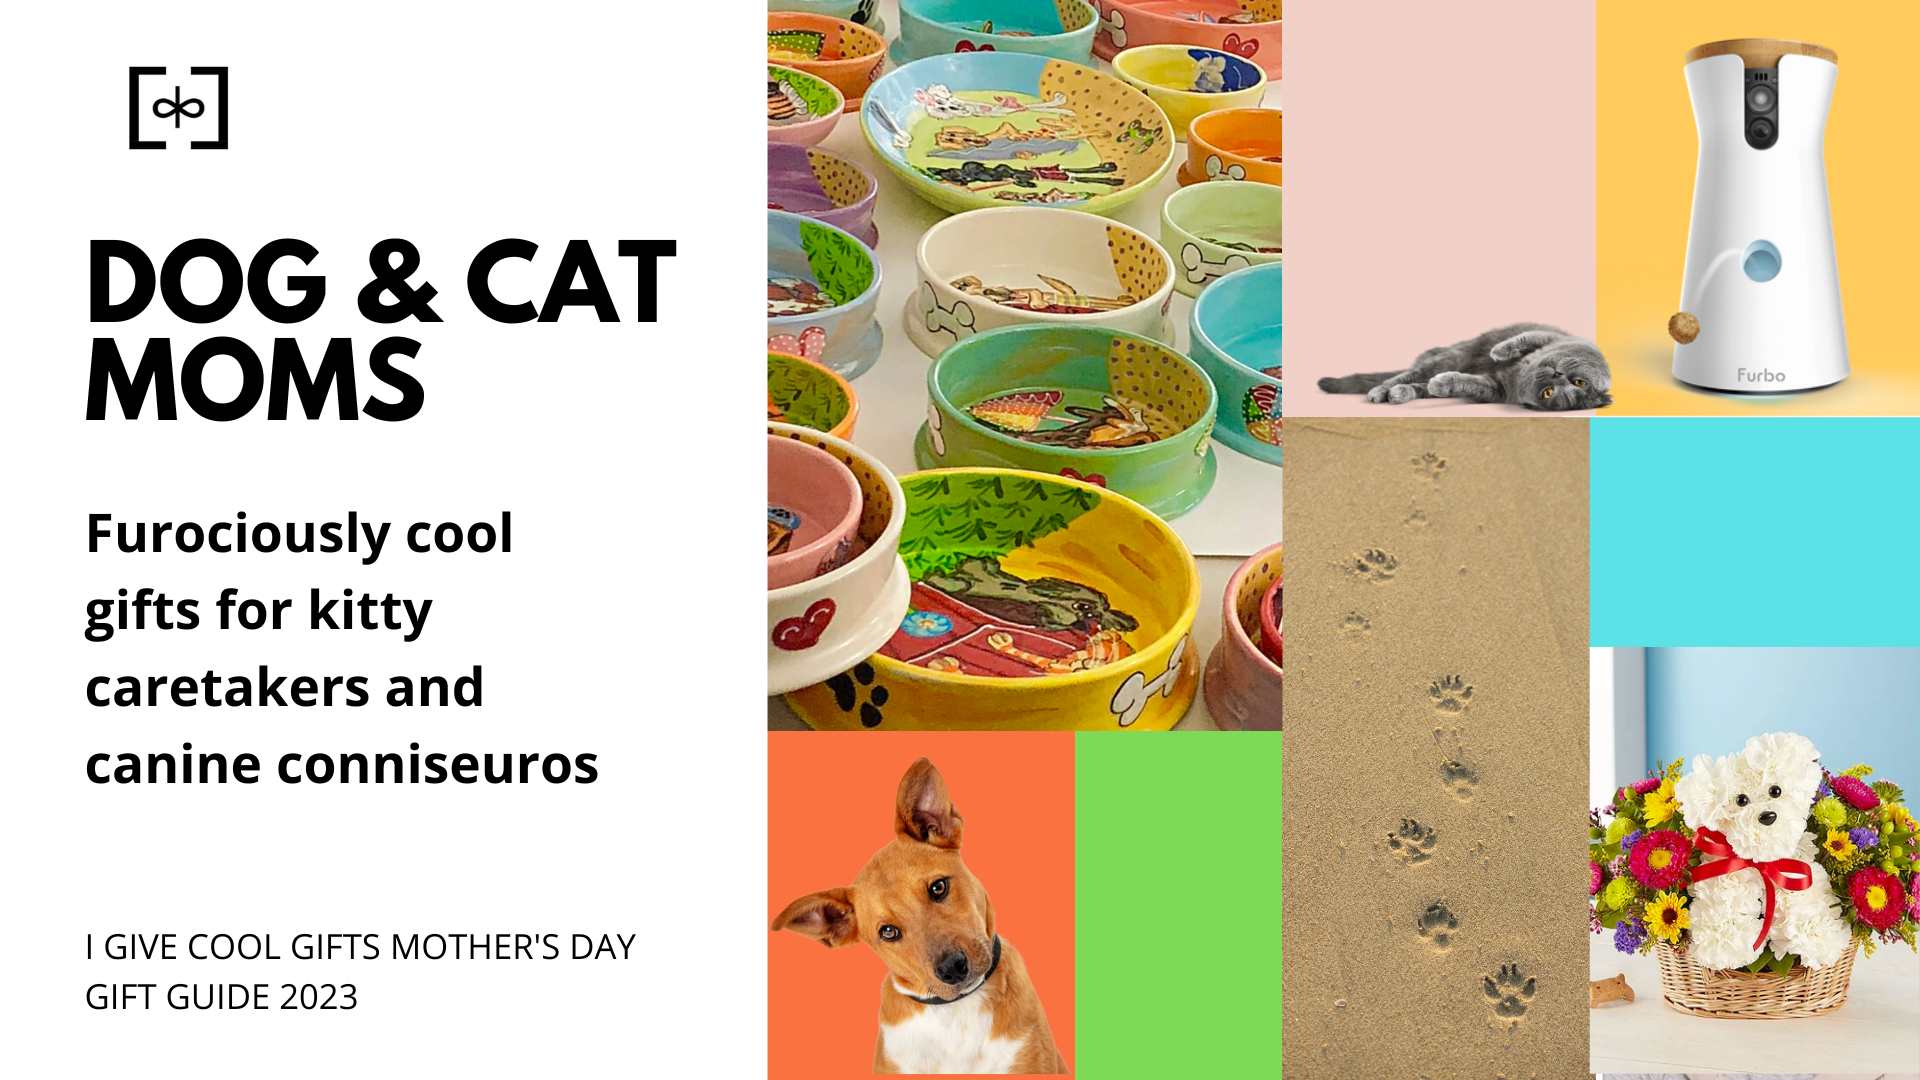 https://igivecoolgifts.com/product_images/uploaded_images/mothers-day-i-give-cool-gifts-dog-cat-pet-moms.png